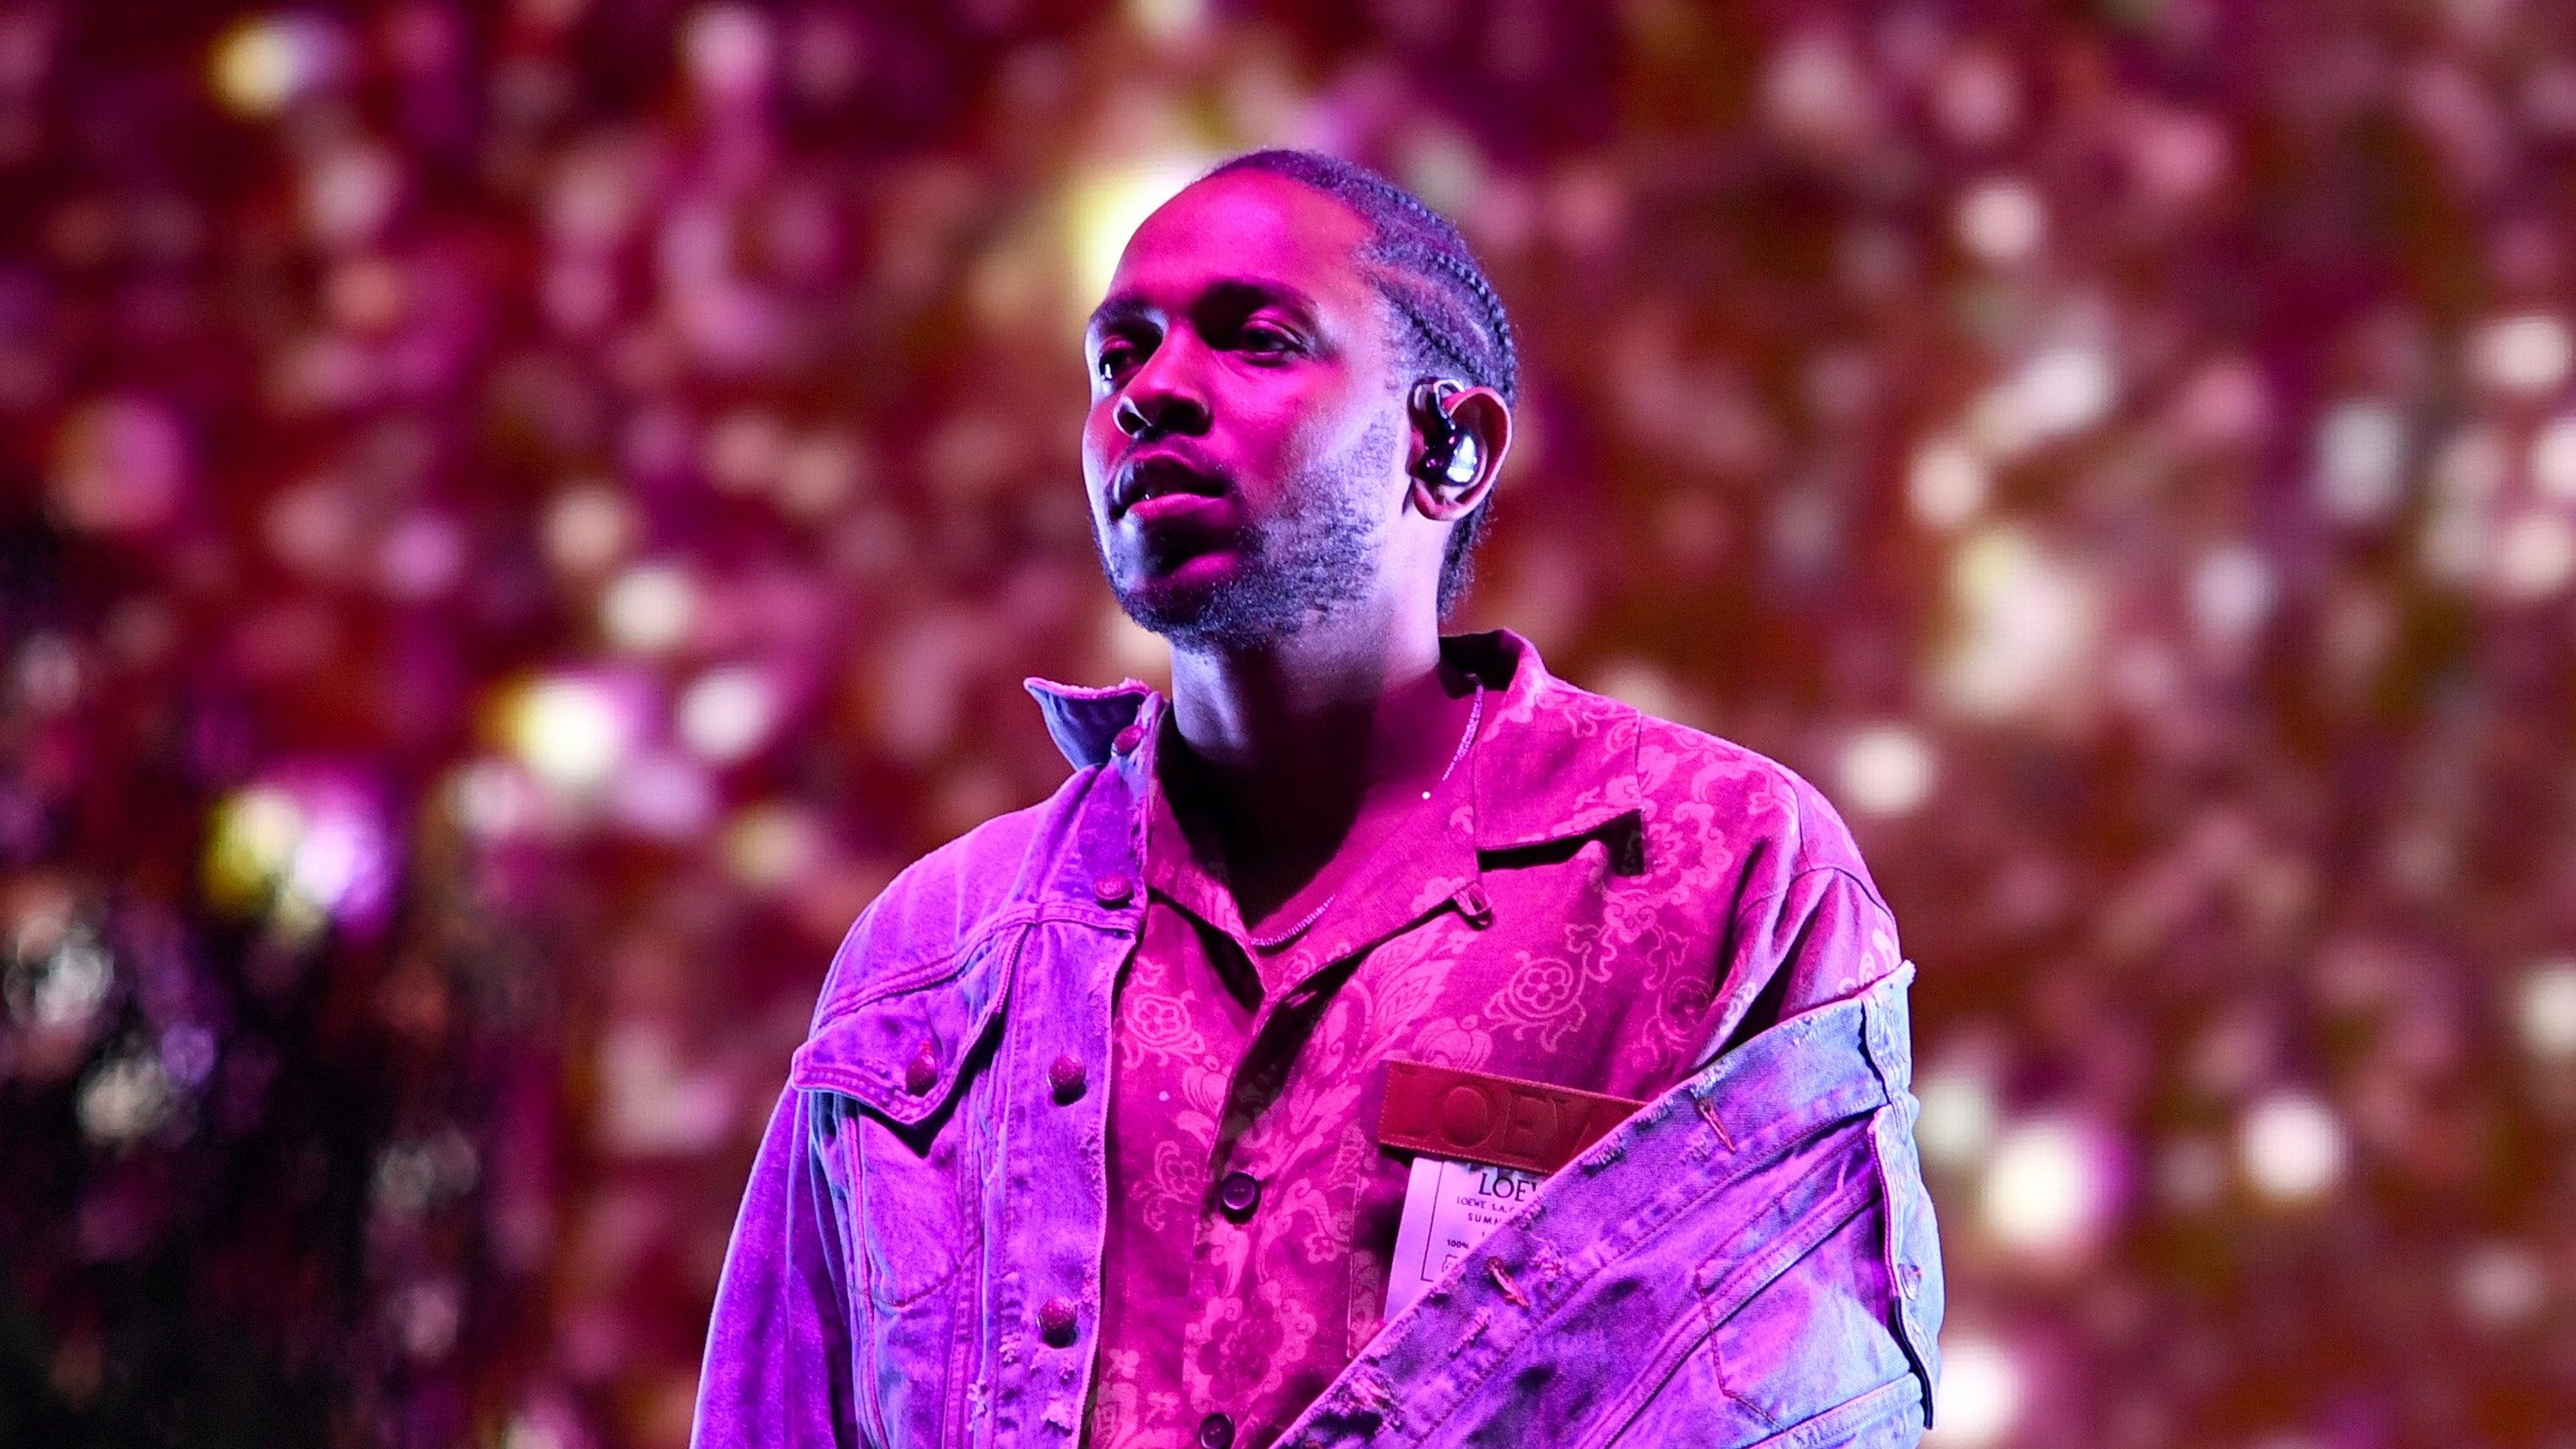 Kendrick Lamar teases new music, says release will be his “final TDE album”